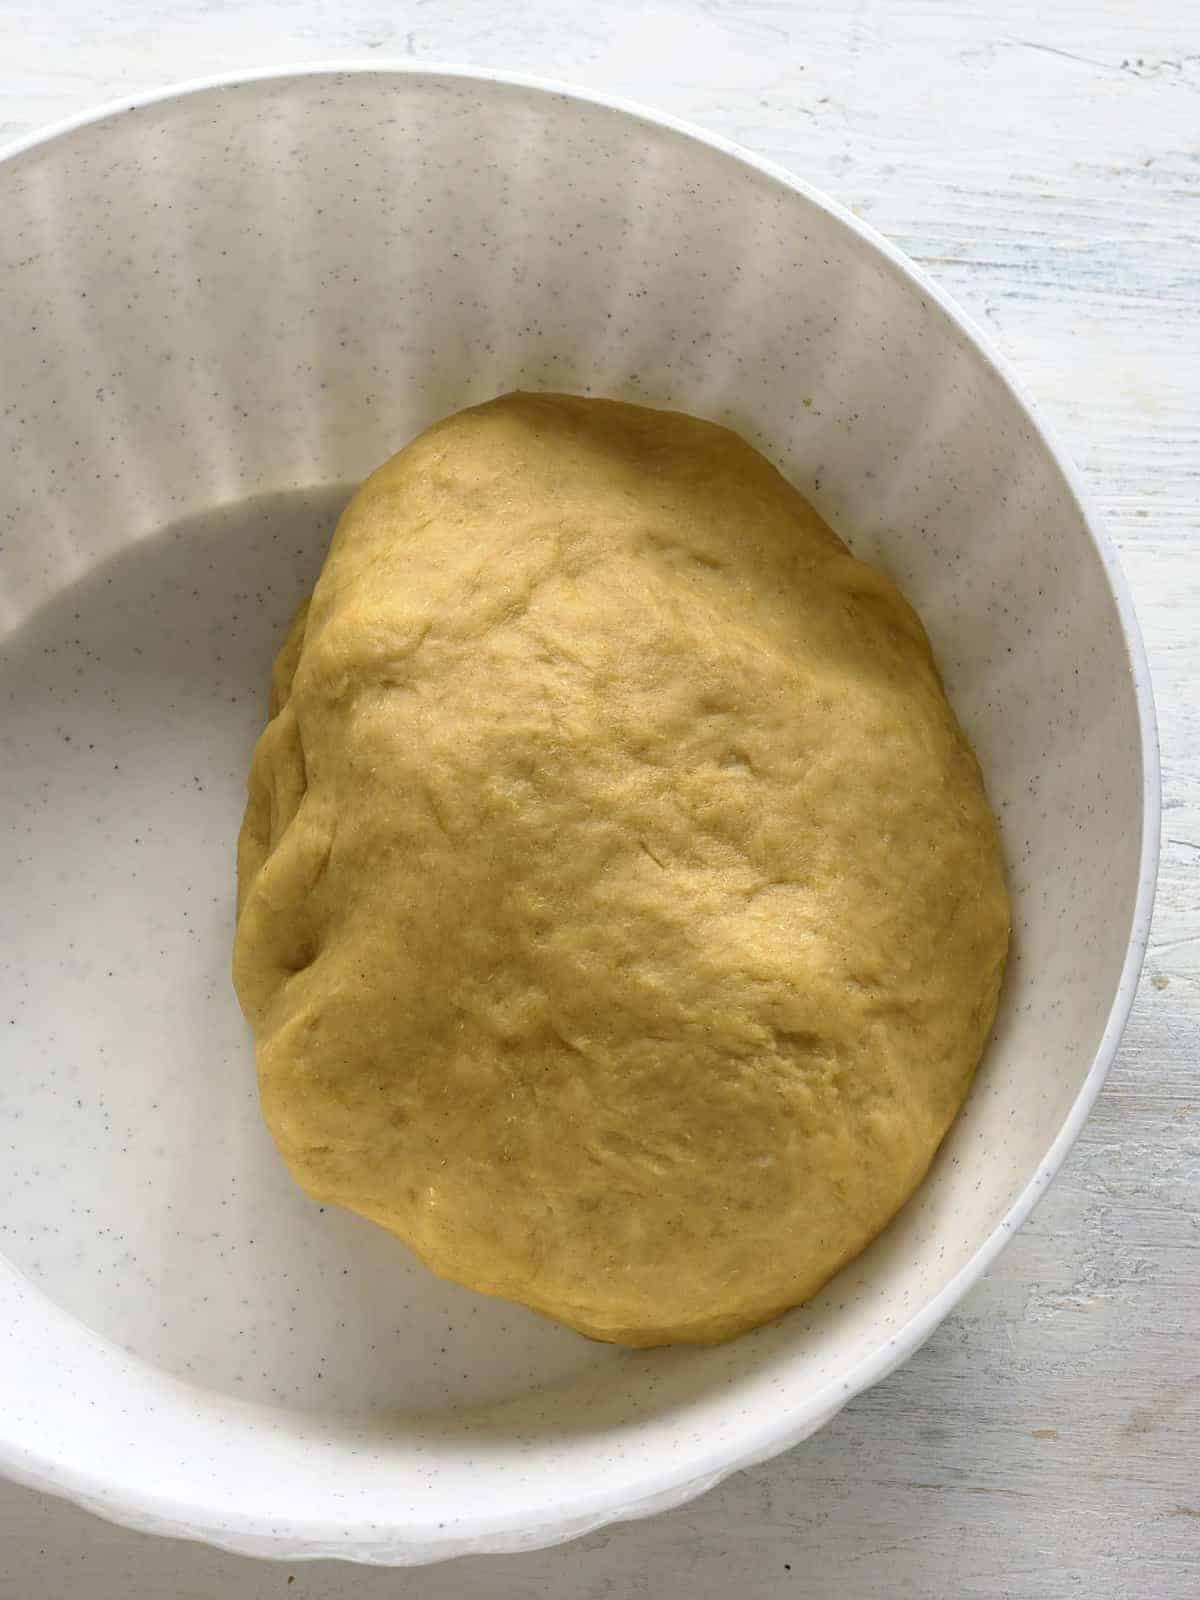 yeast dough for a roll